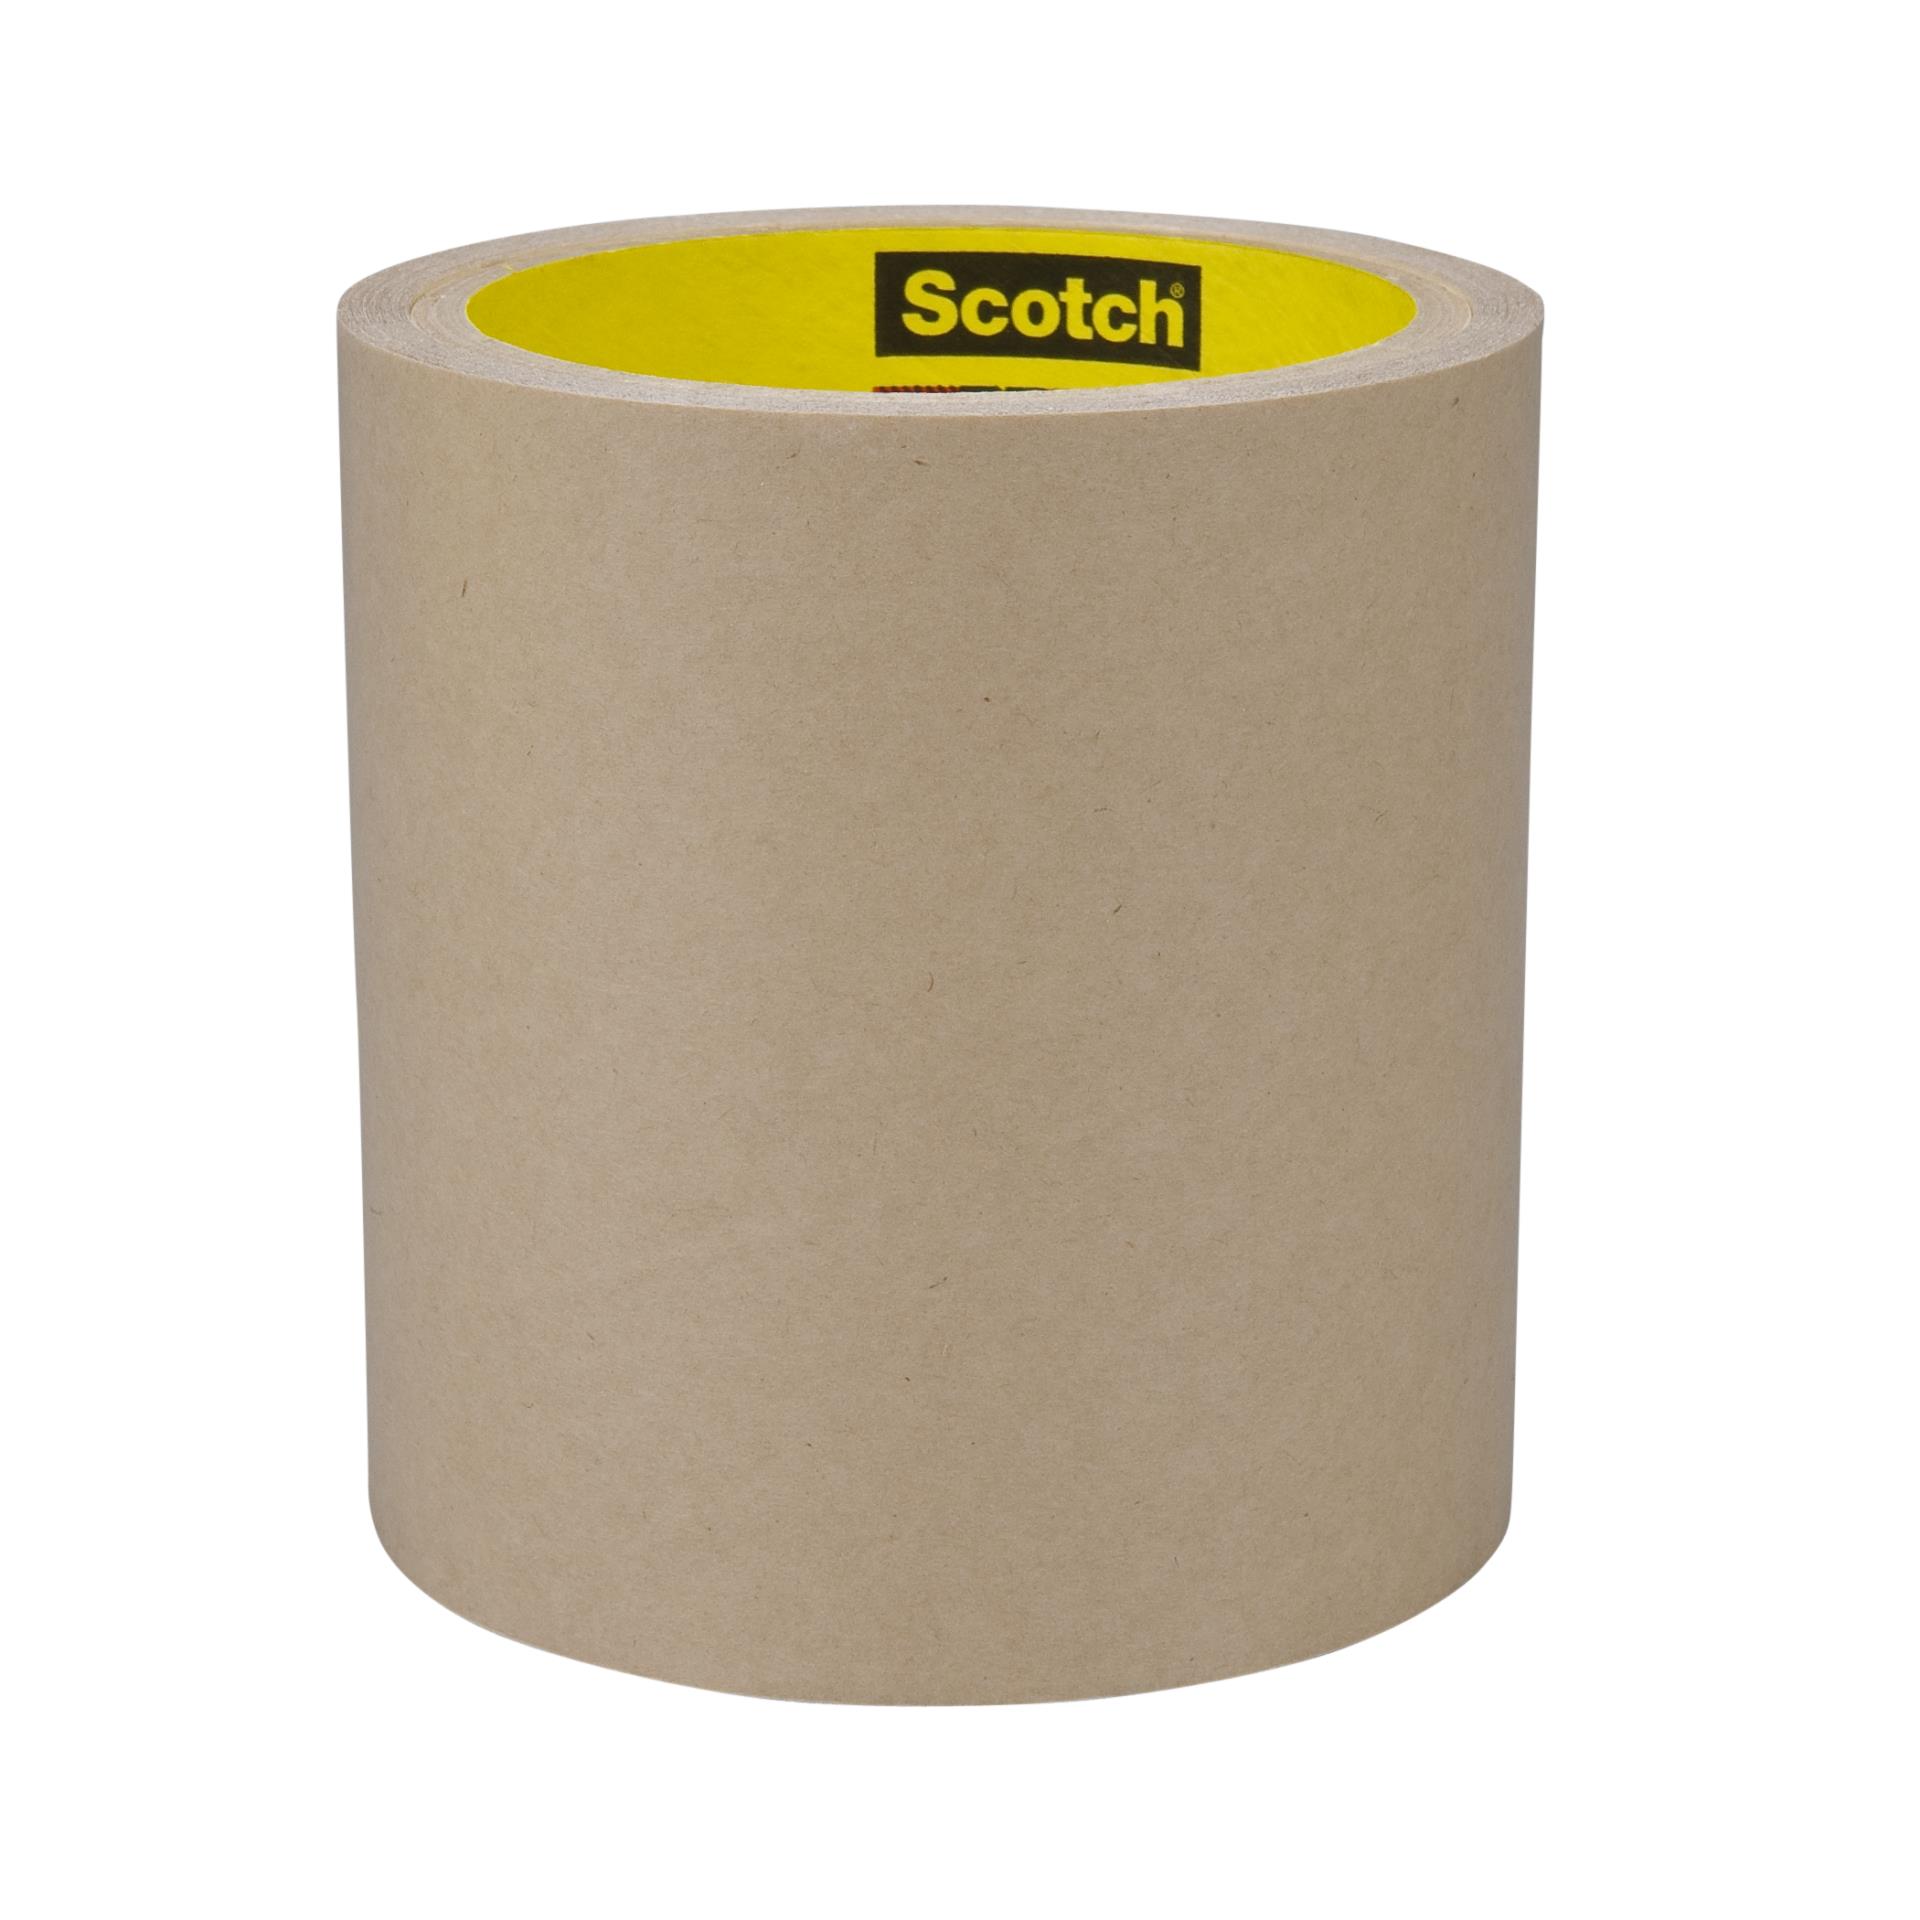 3M 9719 Electrically Conductive Adhesive Transfer Tape 1 roll 6in Width x 5yd Length 